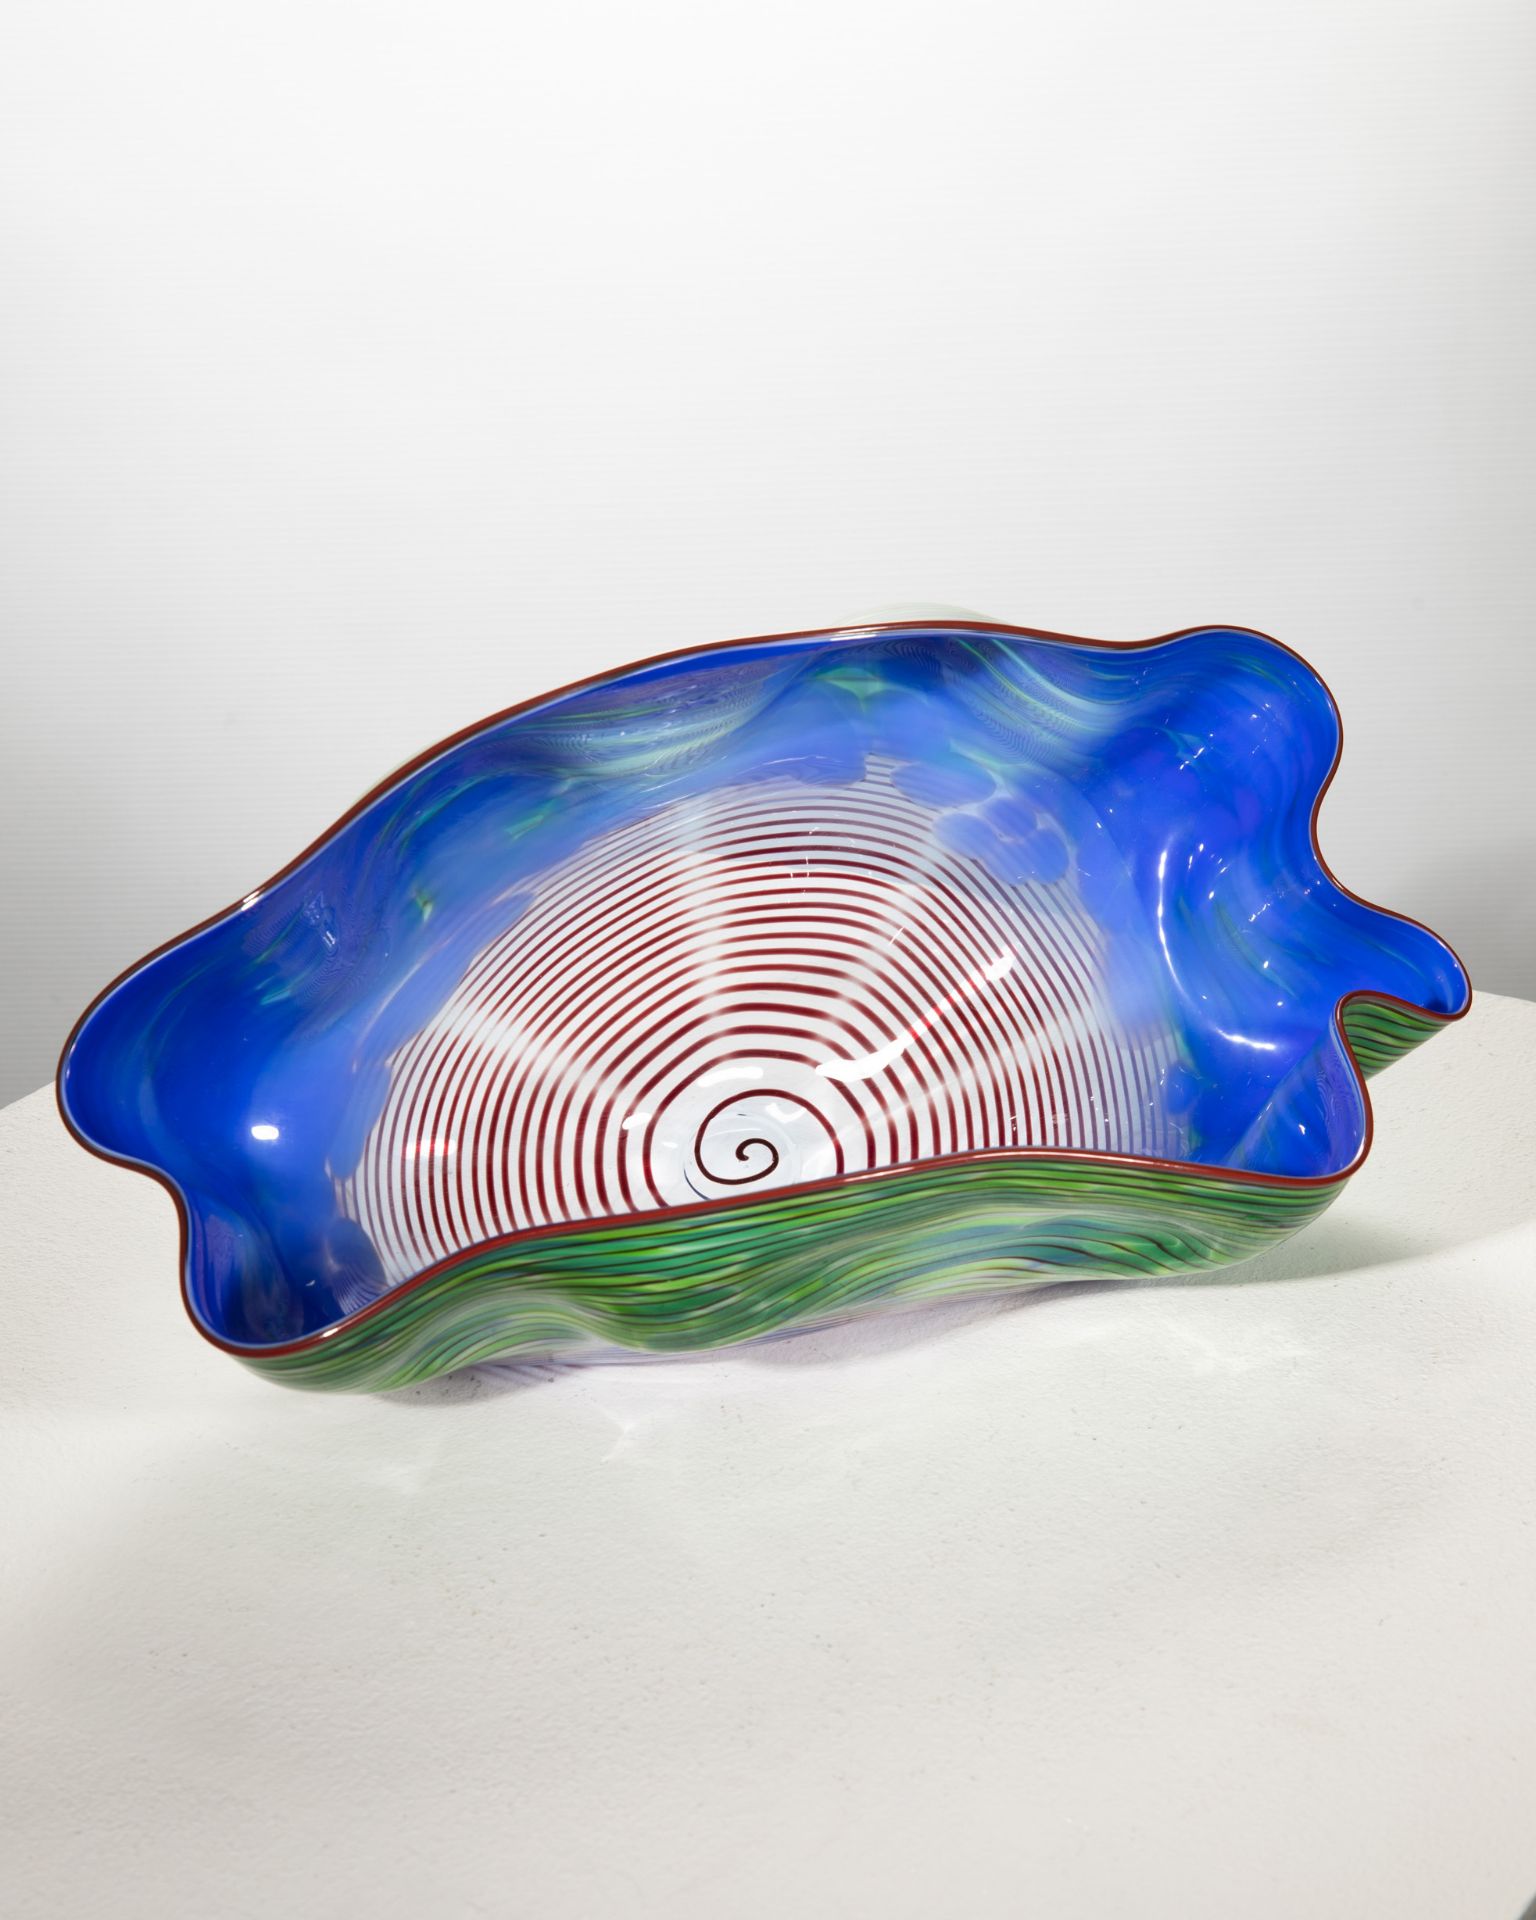 Dale Chihuly, 3 seaforms piece sculptural glasforms - Image 3 of 17